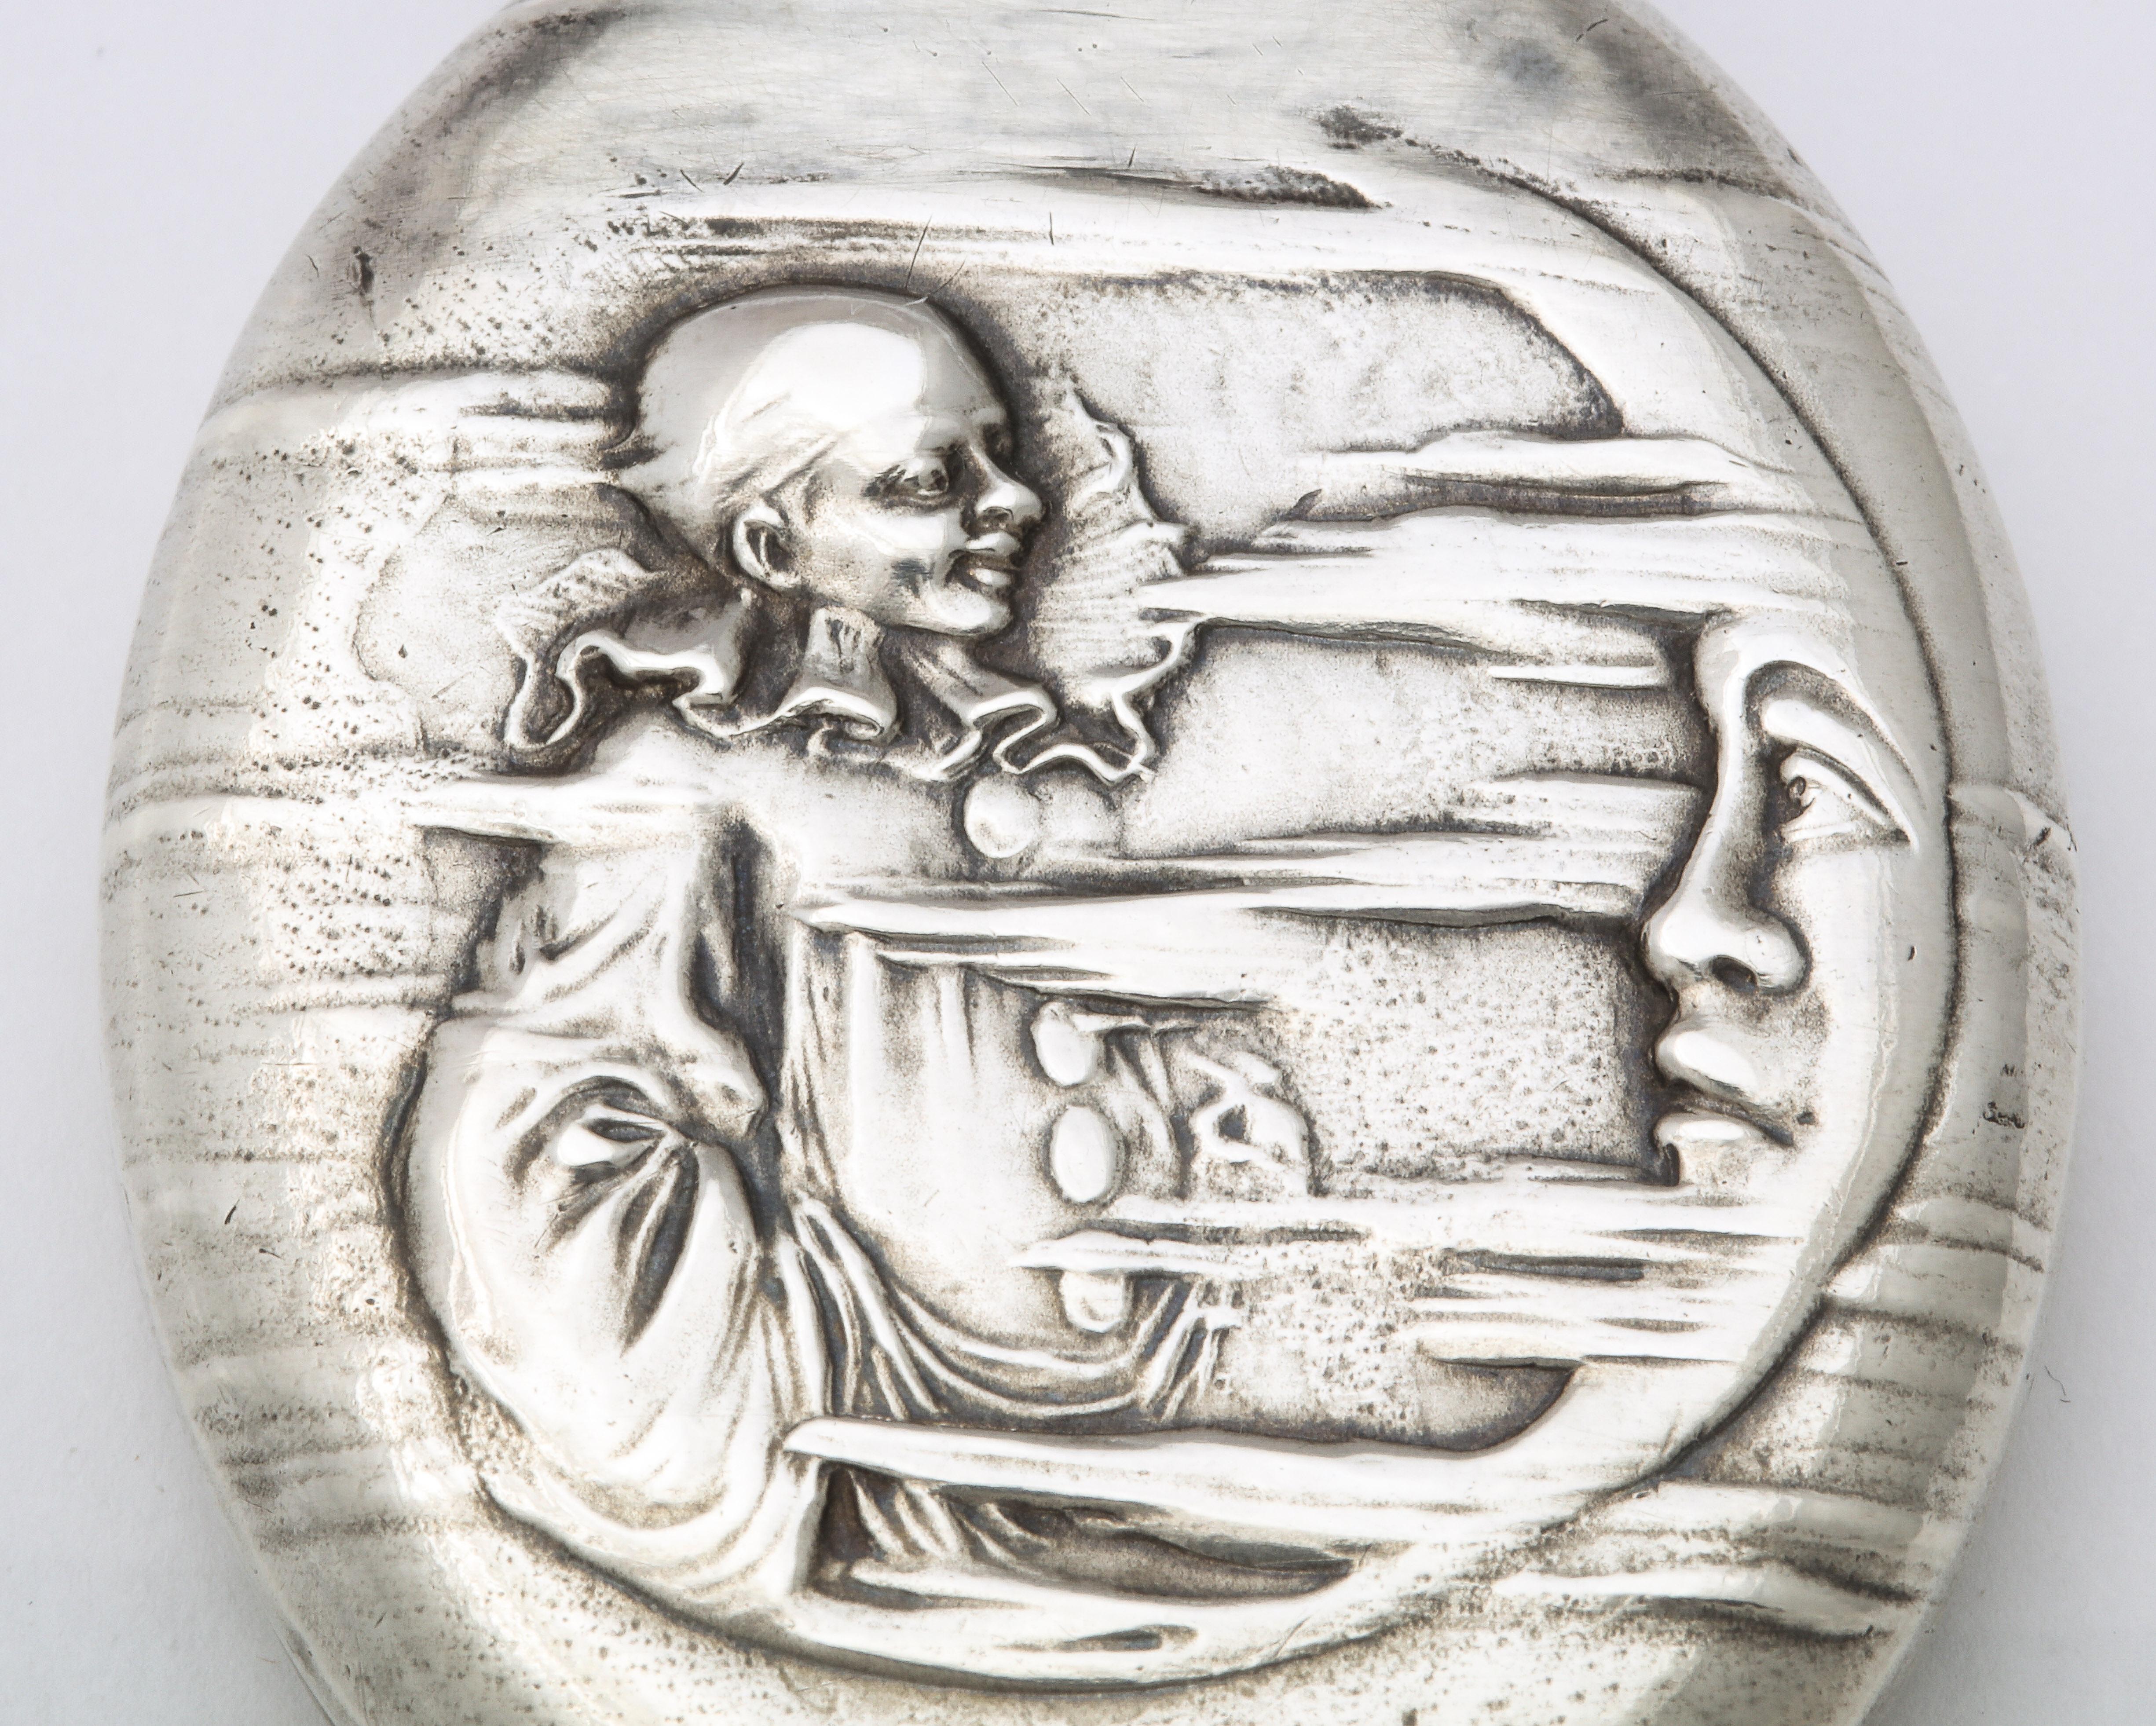 A delightful Art Nouveau locket, with a unique theme, presents an image of Pierrot smiling with amusement as he is in conversation with the man in the crescent moon. Clouds move along the face and opposite side of the locket as the man in the moon